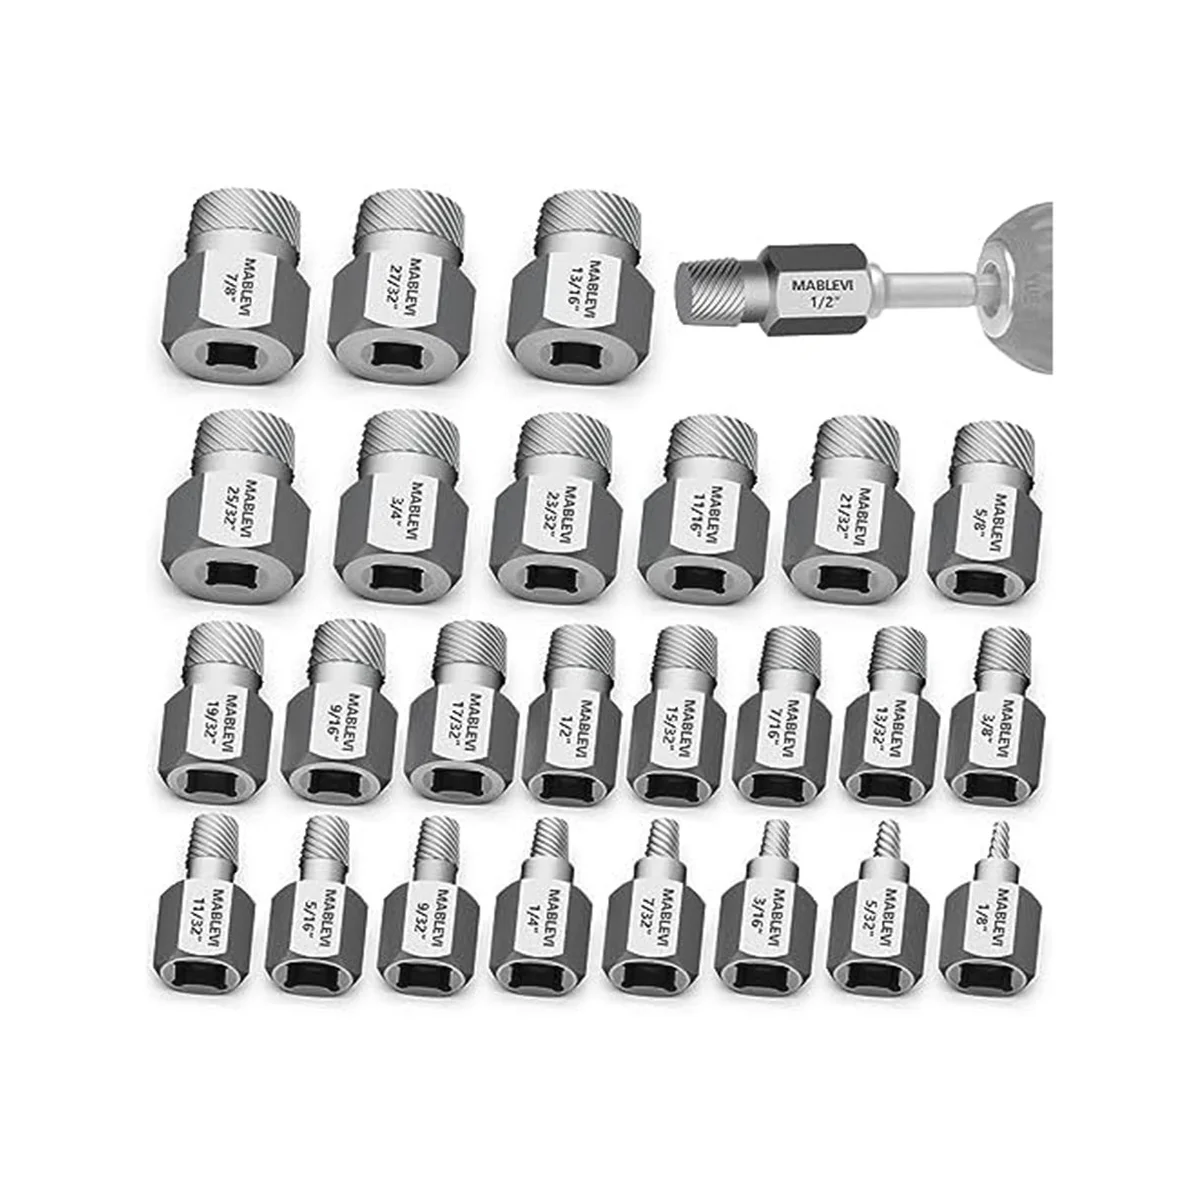 

25Pcs Screw Extractor Set, 3/8 Inch Drive 2-In-1 Double Head Easy Out Bolt Extractor Set, for Removing Broken Studs